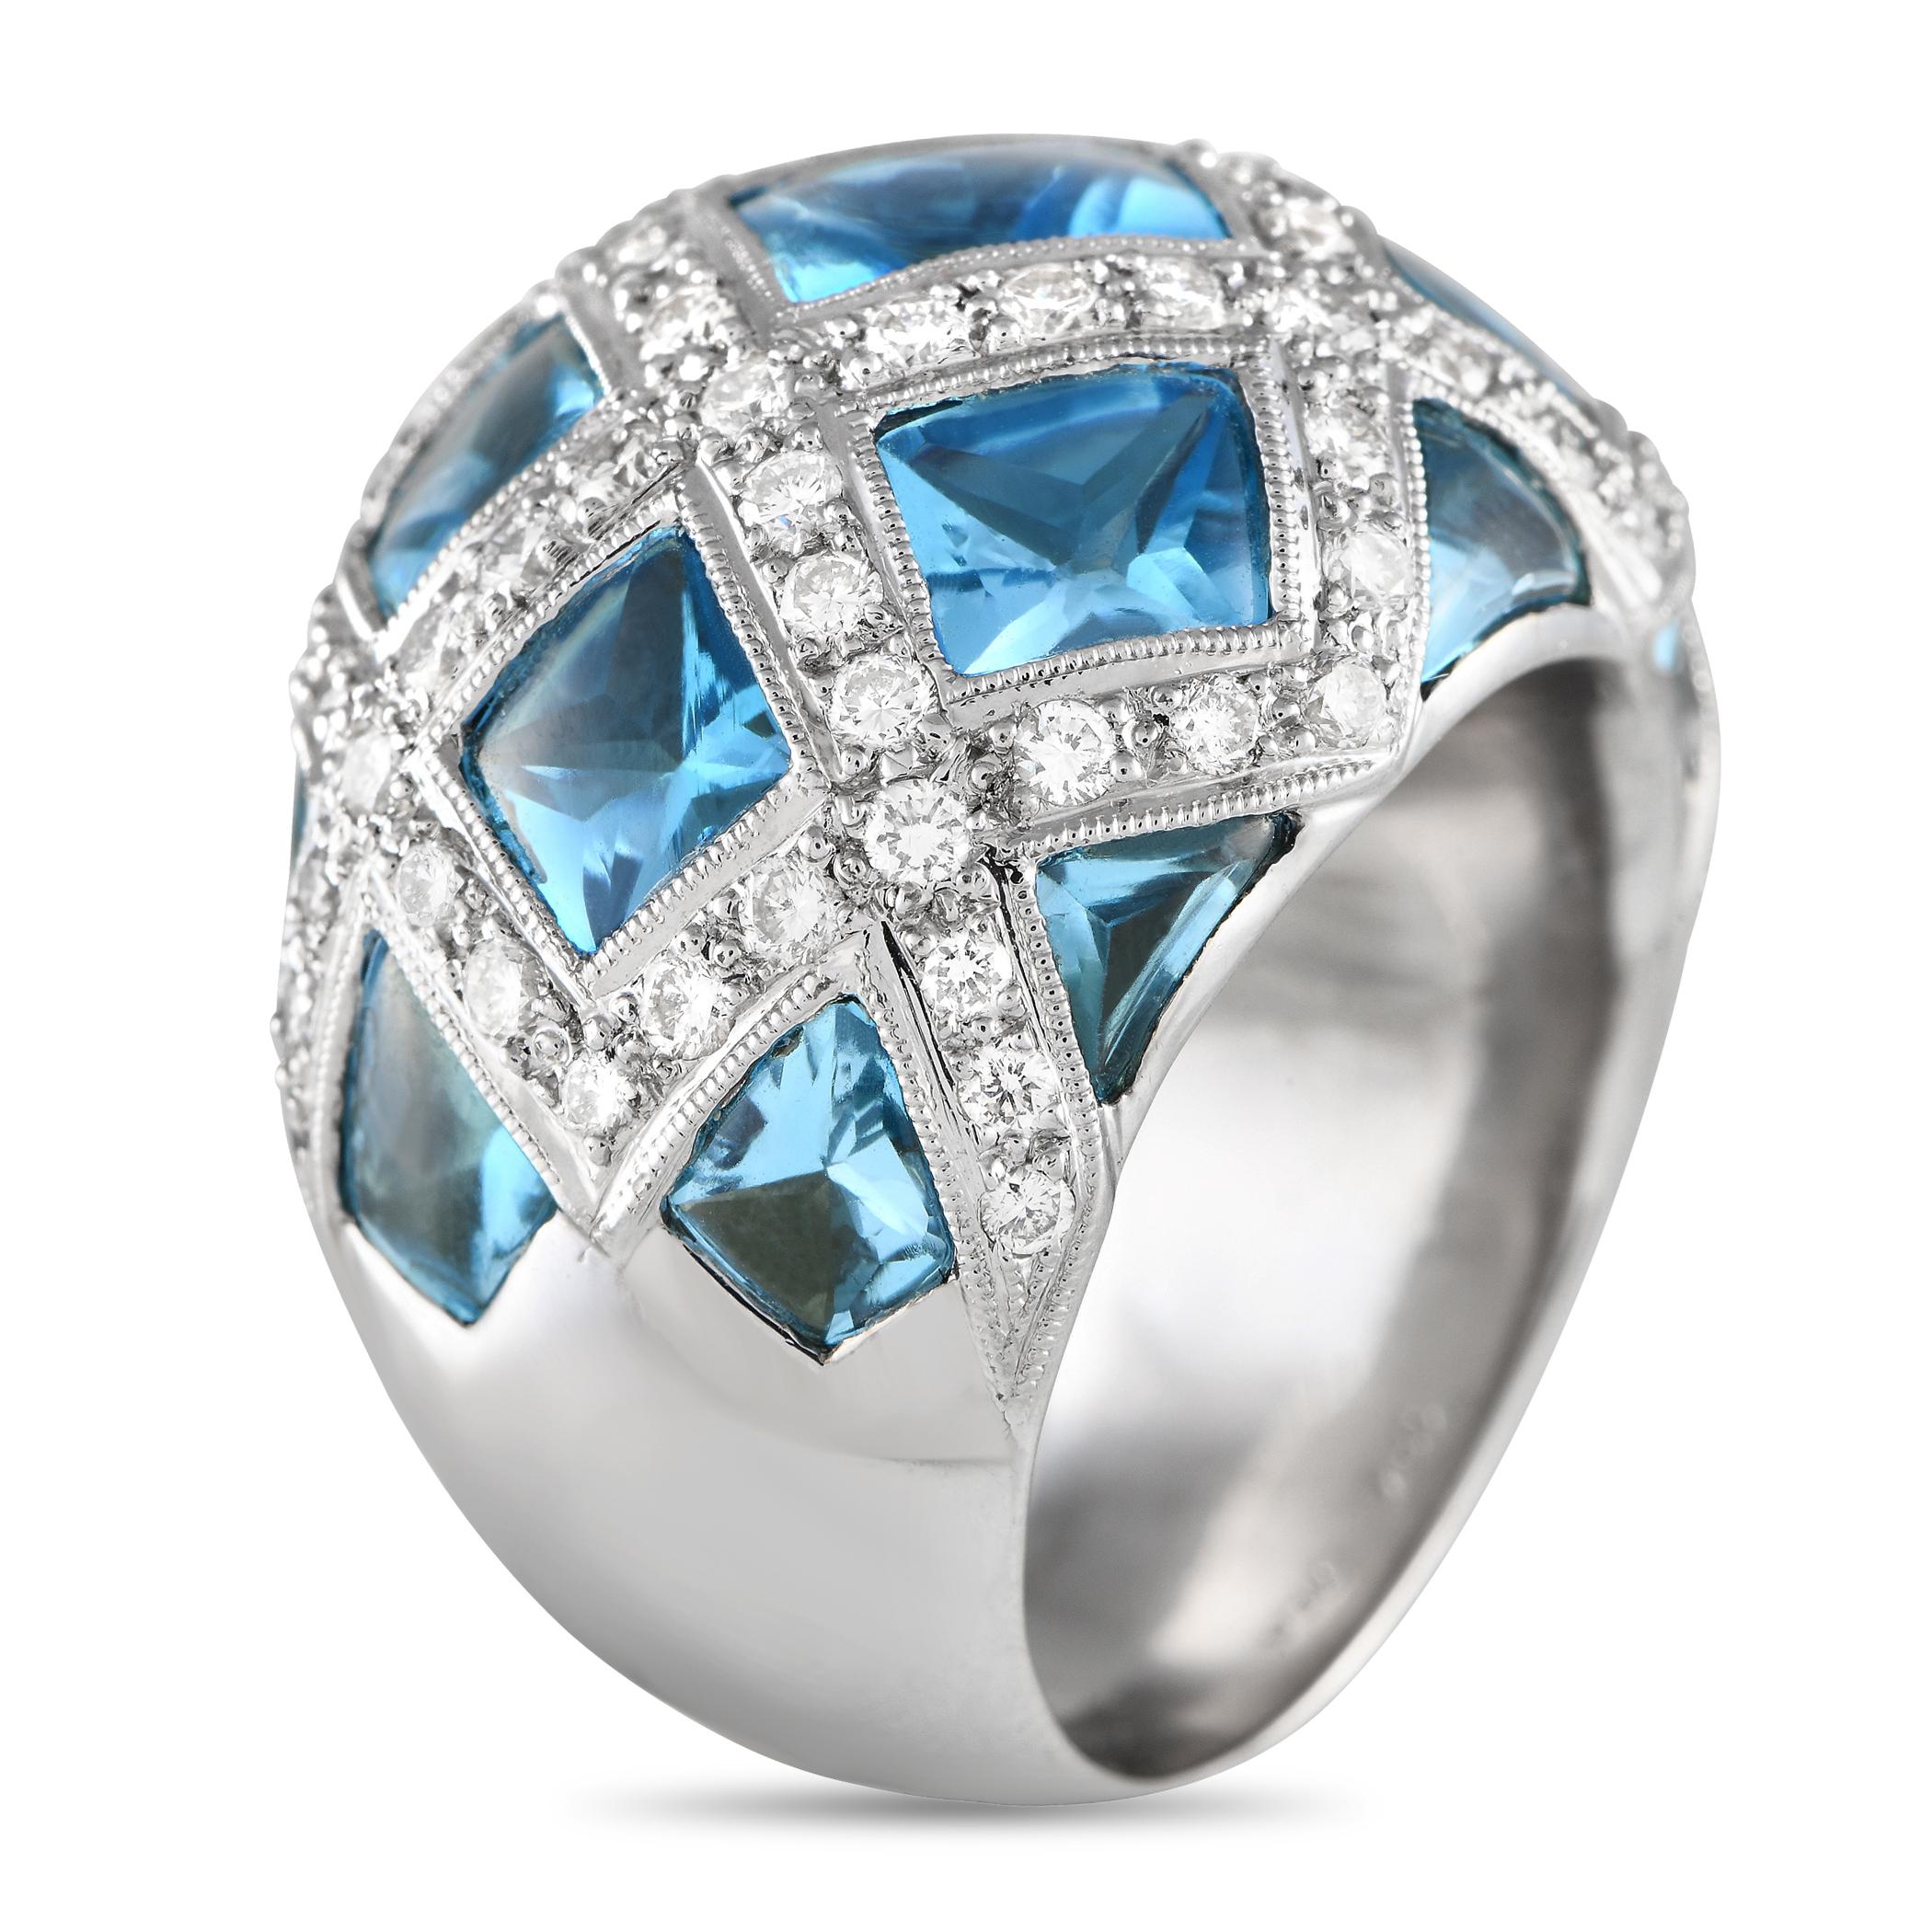 A dramatic 18K White Gold setting makes this ring truly captivating in design. Diamonds with a total weight of 1.48 carats add sparkle to the lattice pattern, which is beautifully complemented by 9.87 carats of blue Topaz gemstones. This